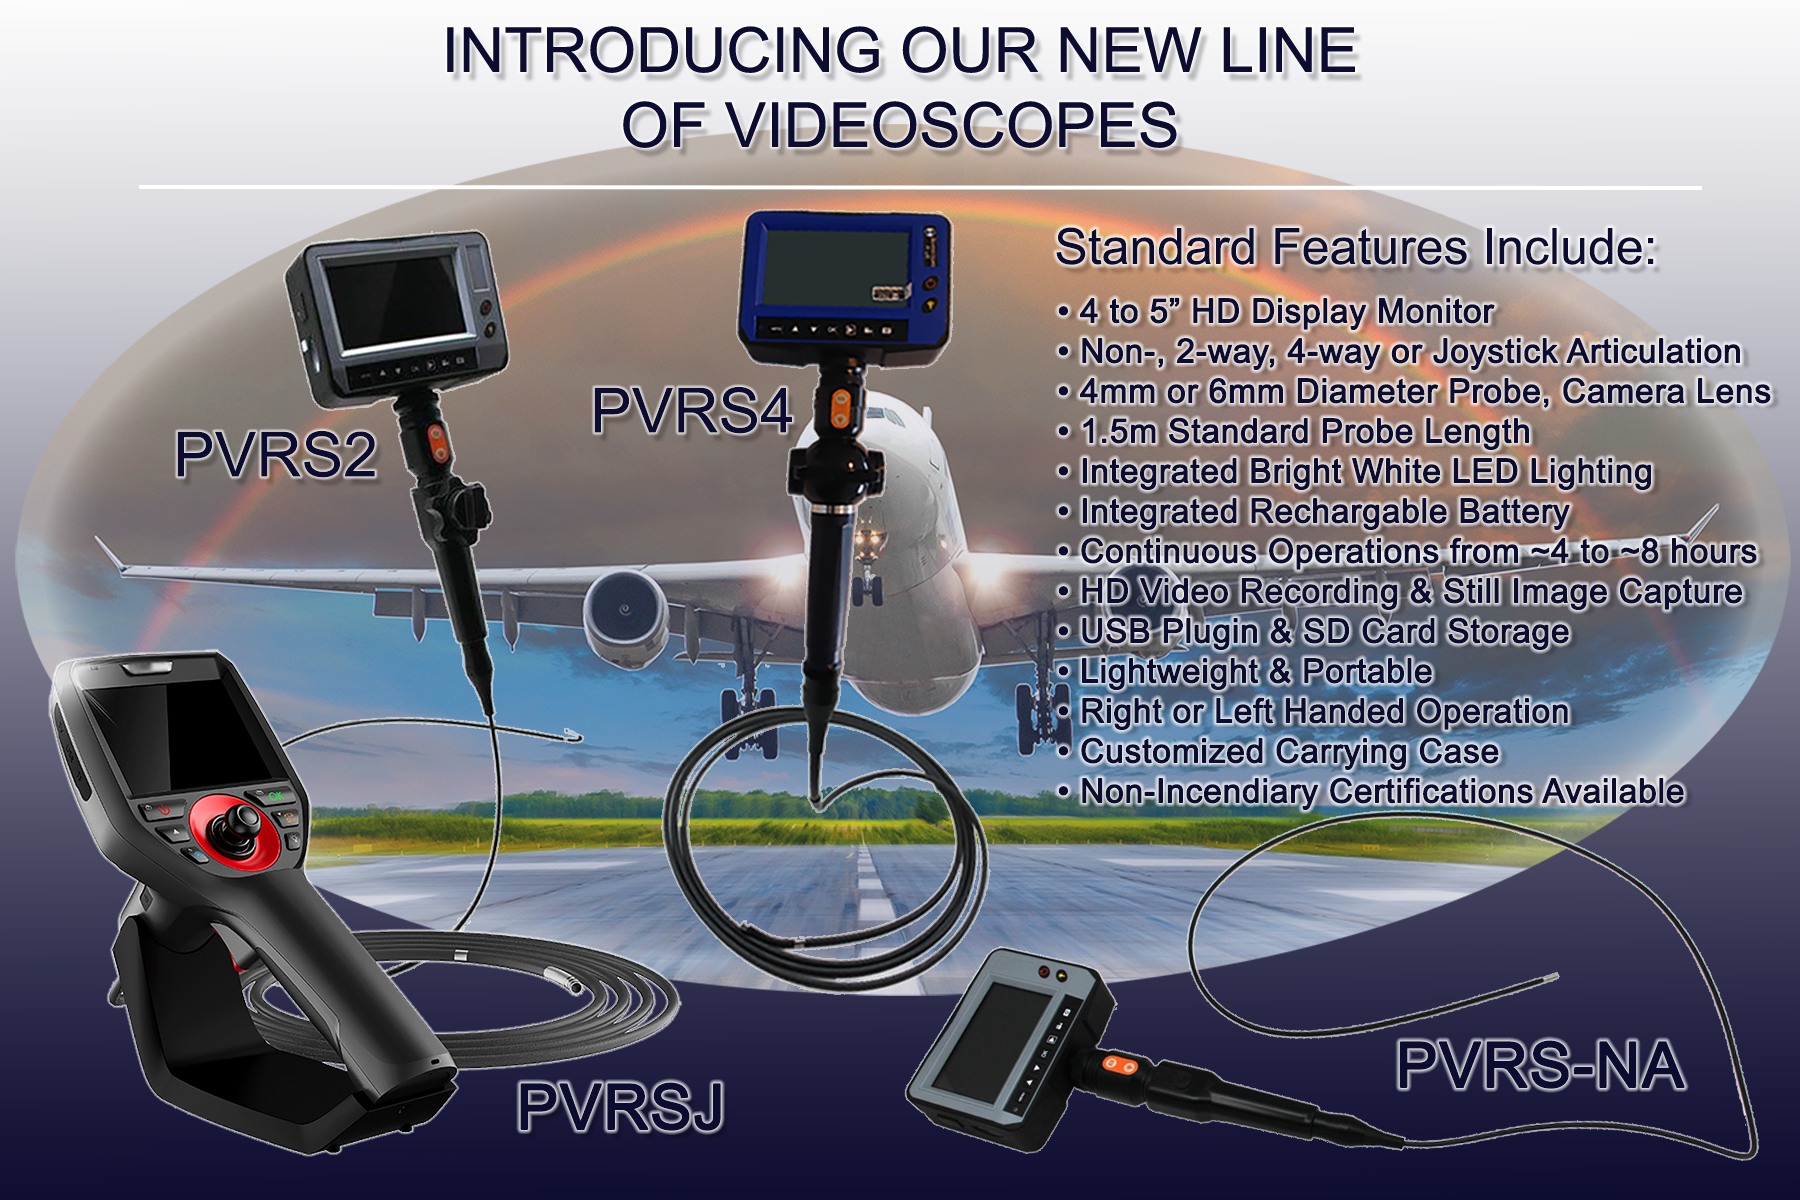 Introducing our new line of Videoscopes, the PVRS series! Portable Video Recording Systems including 4 or 5 inch HD LCD monitor displays, Joystick articulation, 2 or 4-way articulation, or non articulating, with built in rechargable batteries, integrated bright white LED lighting, video recording and still image capture, USB to PC adaptor as well as SD micro card storage.